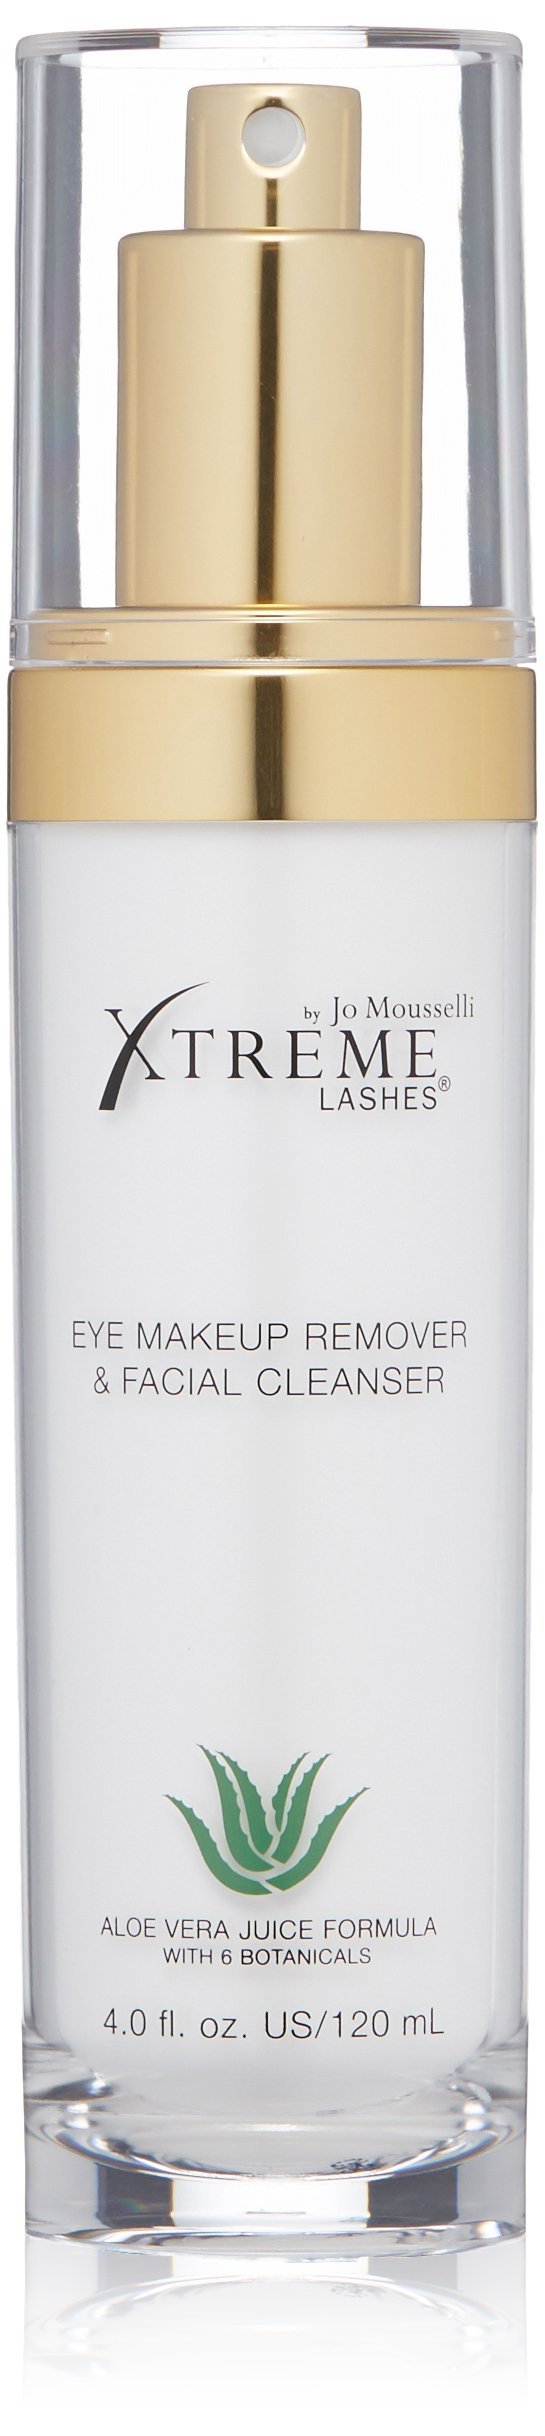 Xtreme Lashes Makeup Remover and Facial Cleanser 120mL - BeesActive Australia